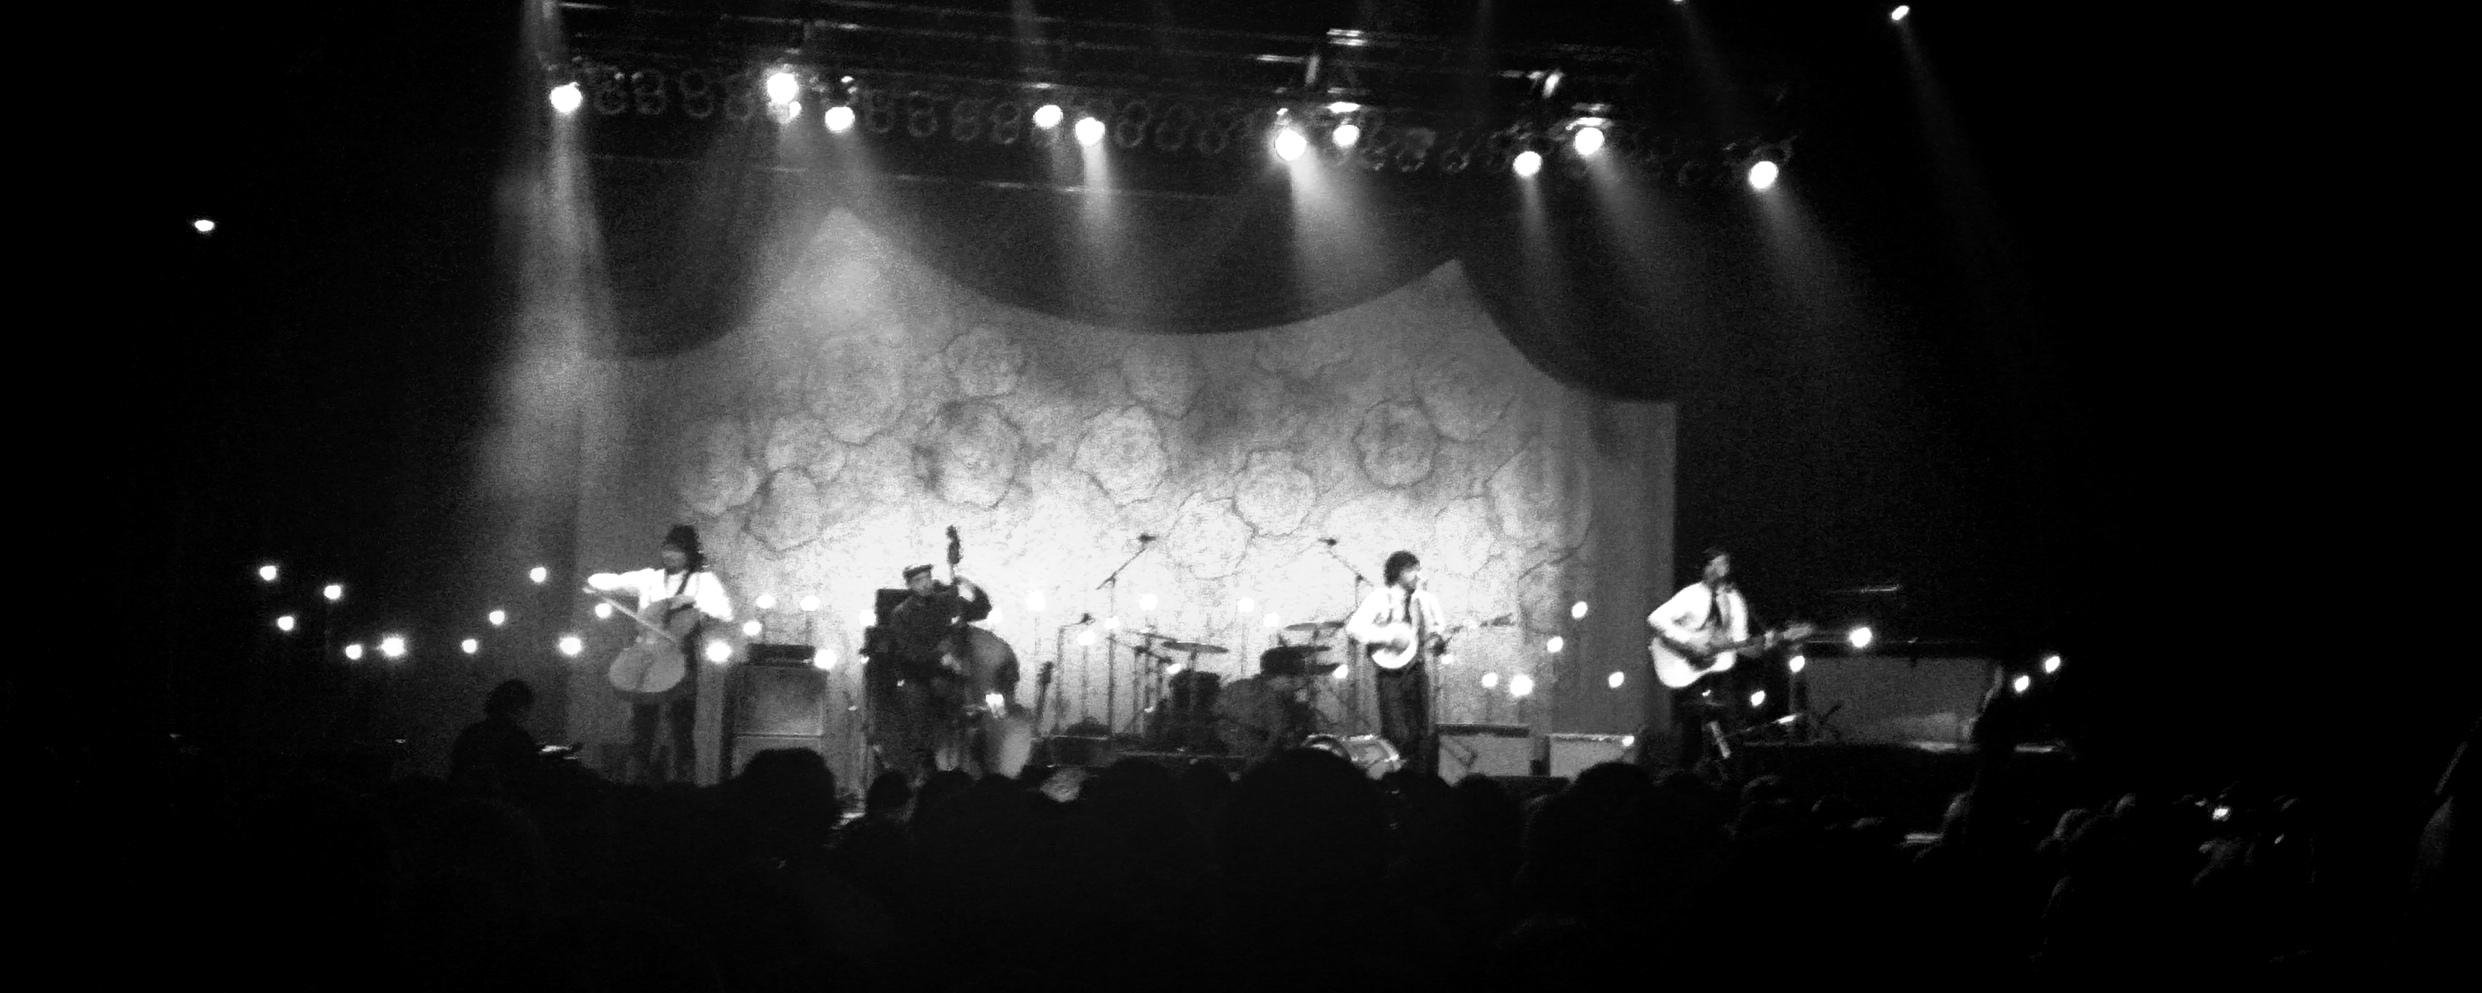 The Avett Brothers on stage in 2011